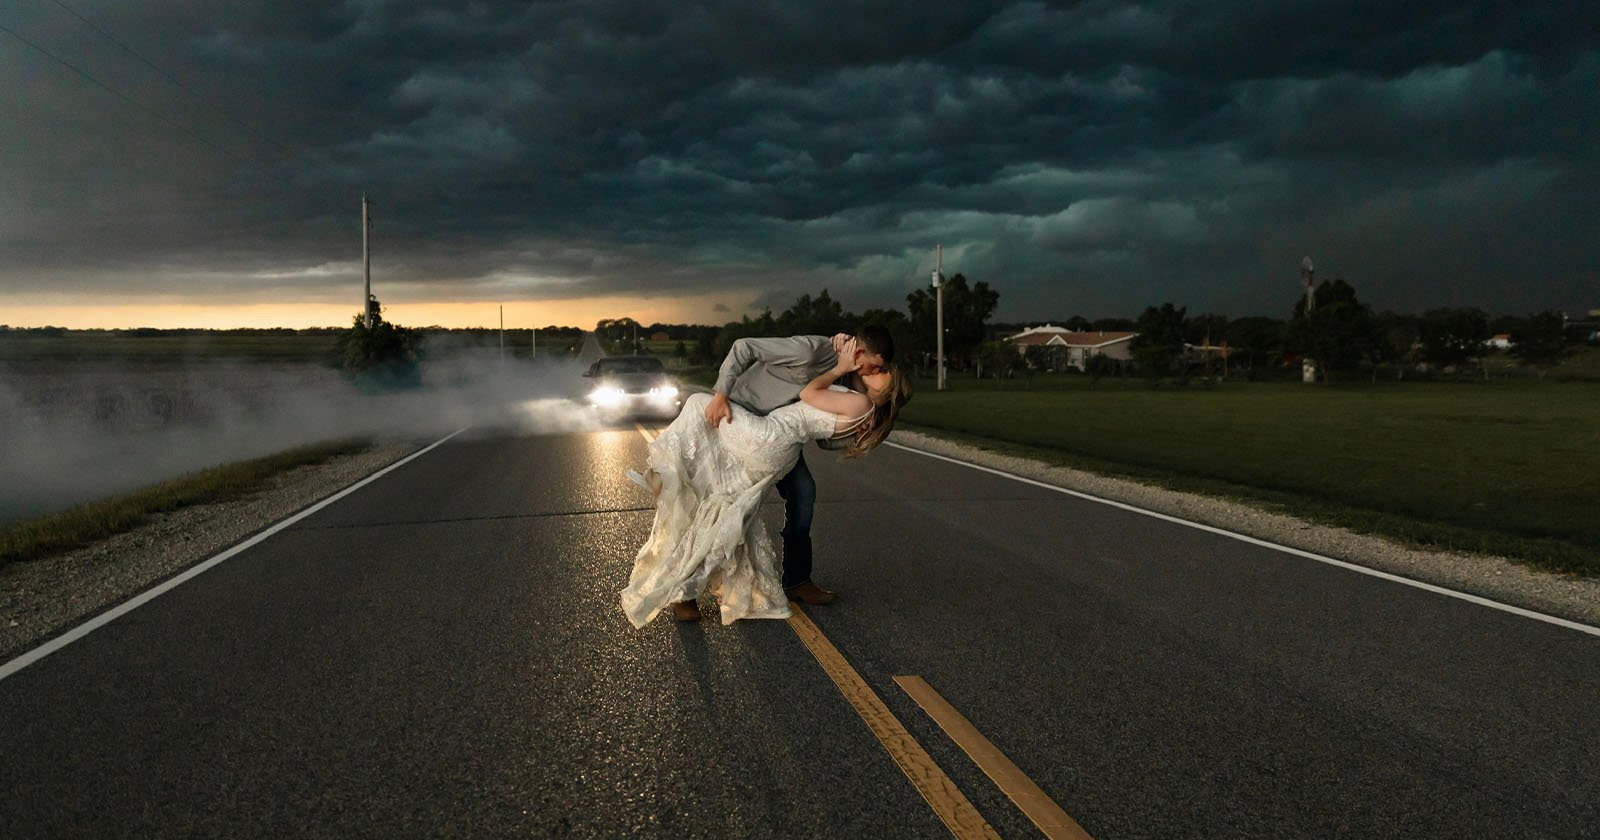 Wedding Photographer Uses Thunderstorm as Epic Backdrop For Bride and Groom